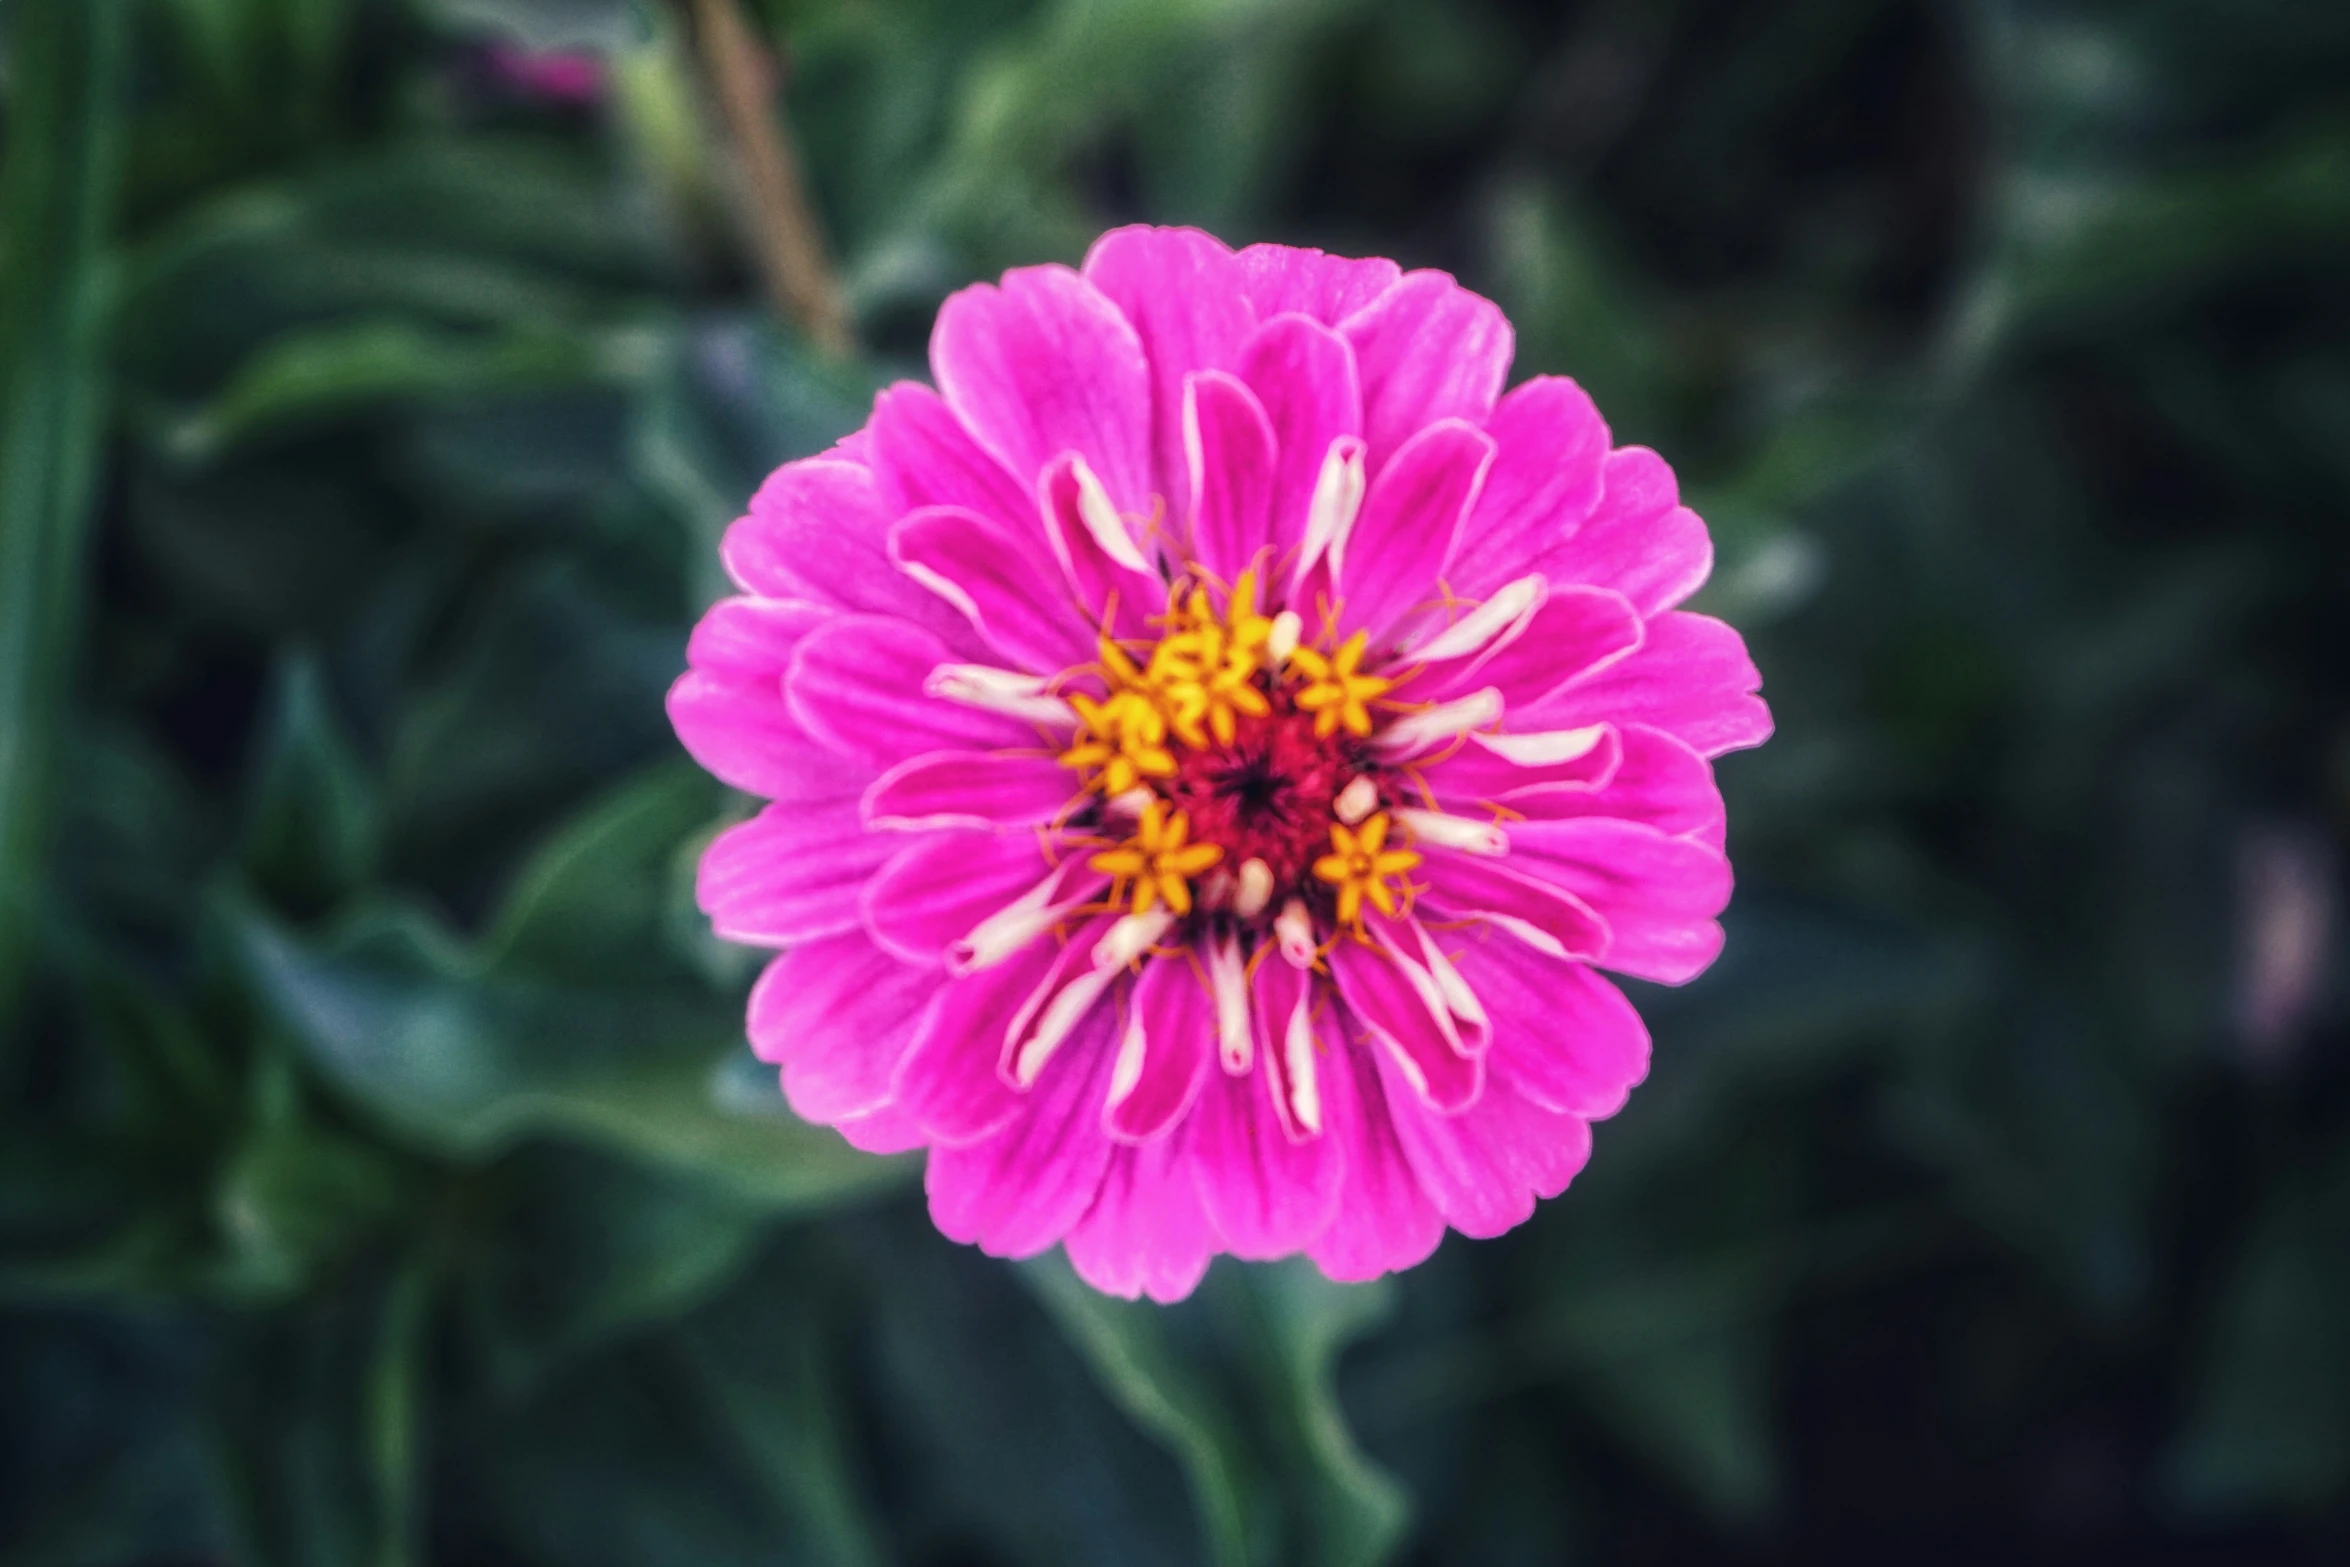 a single pink flower with a yellow center